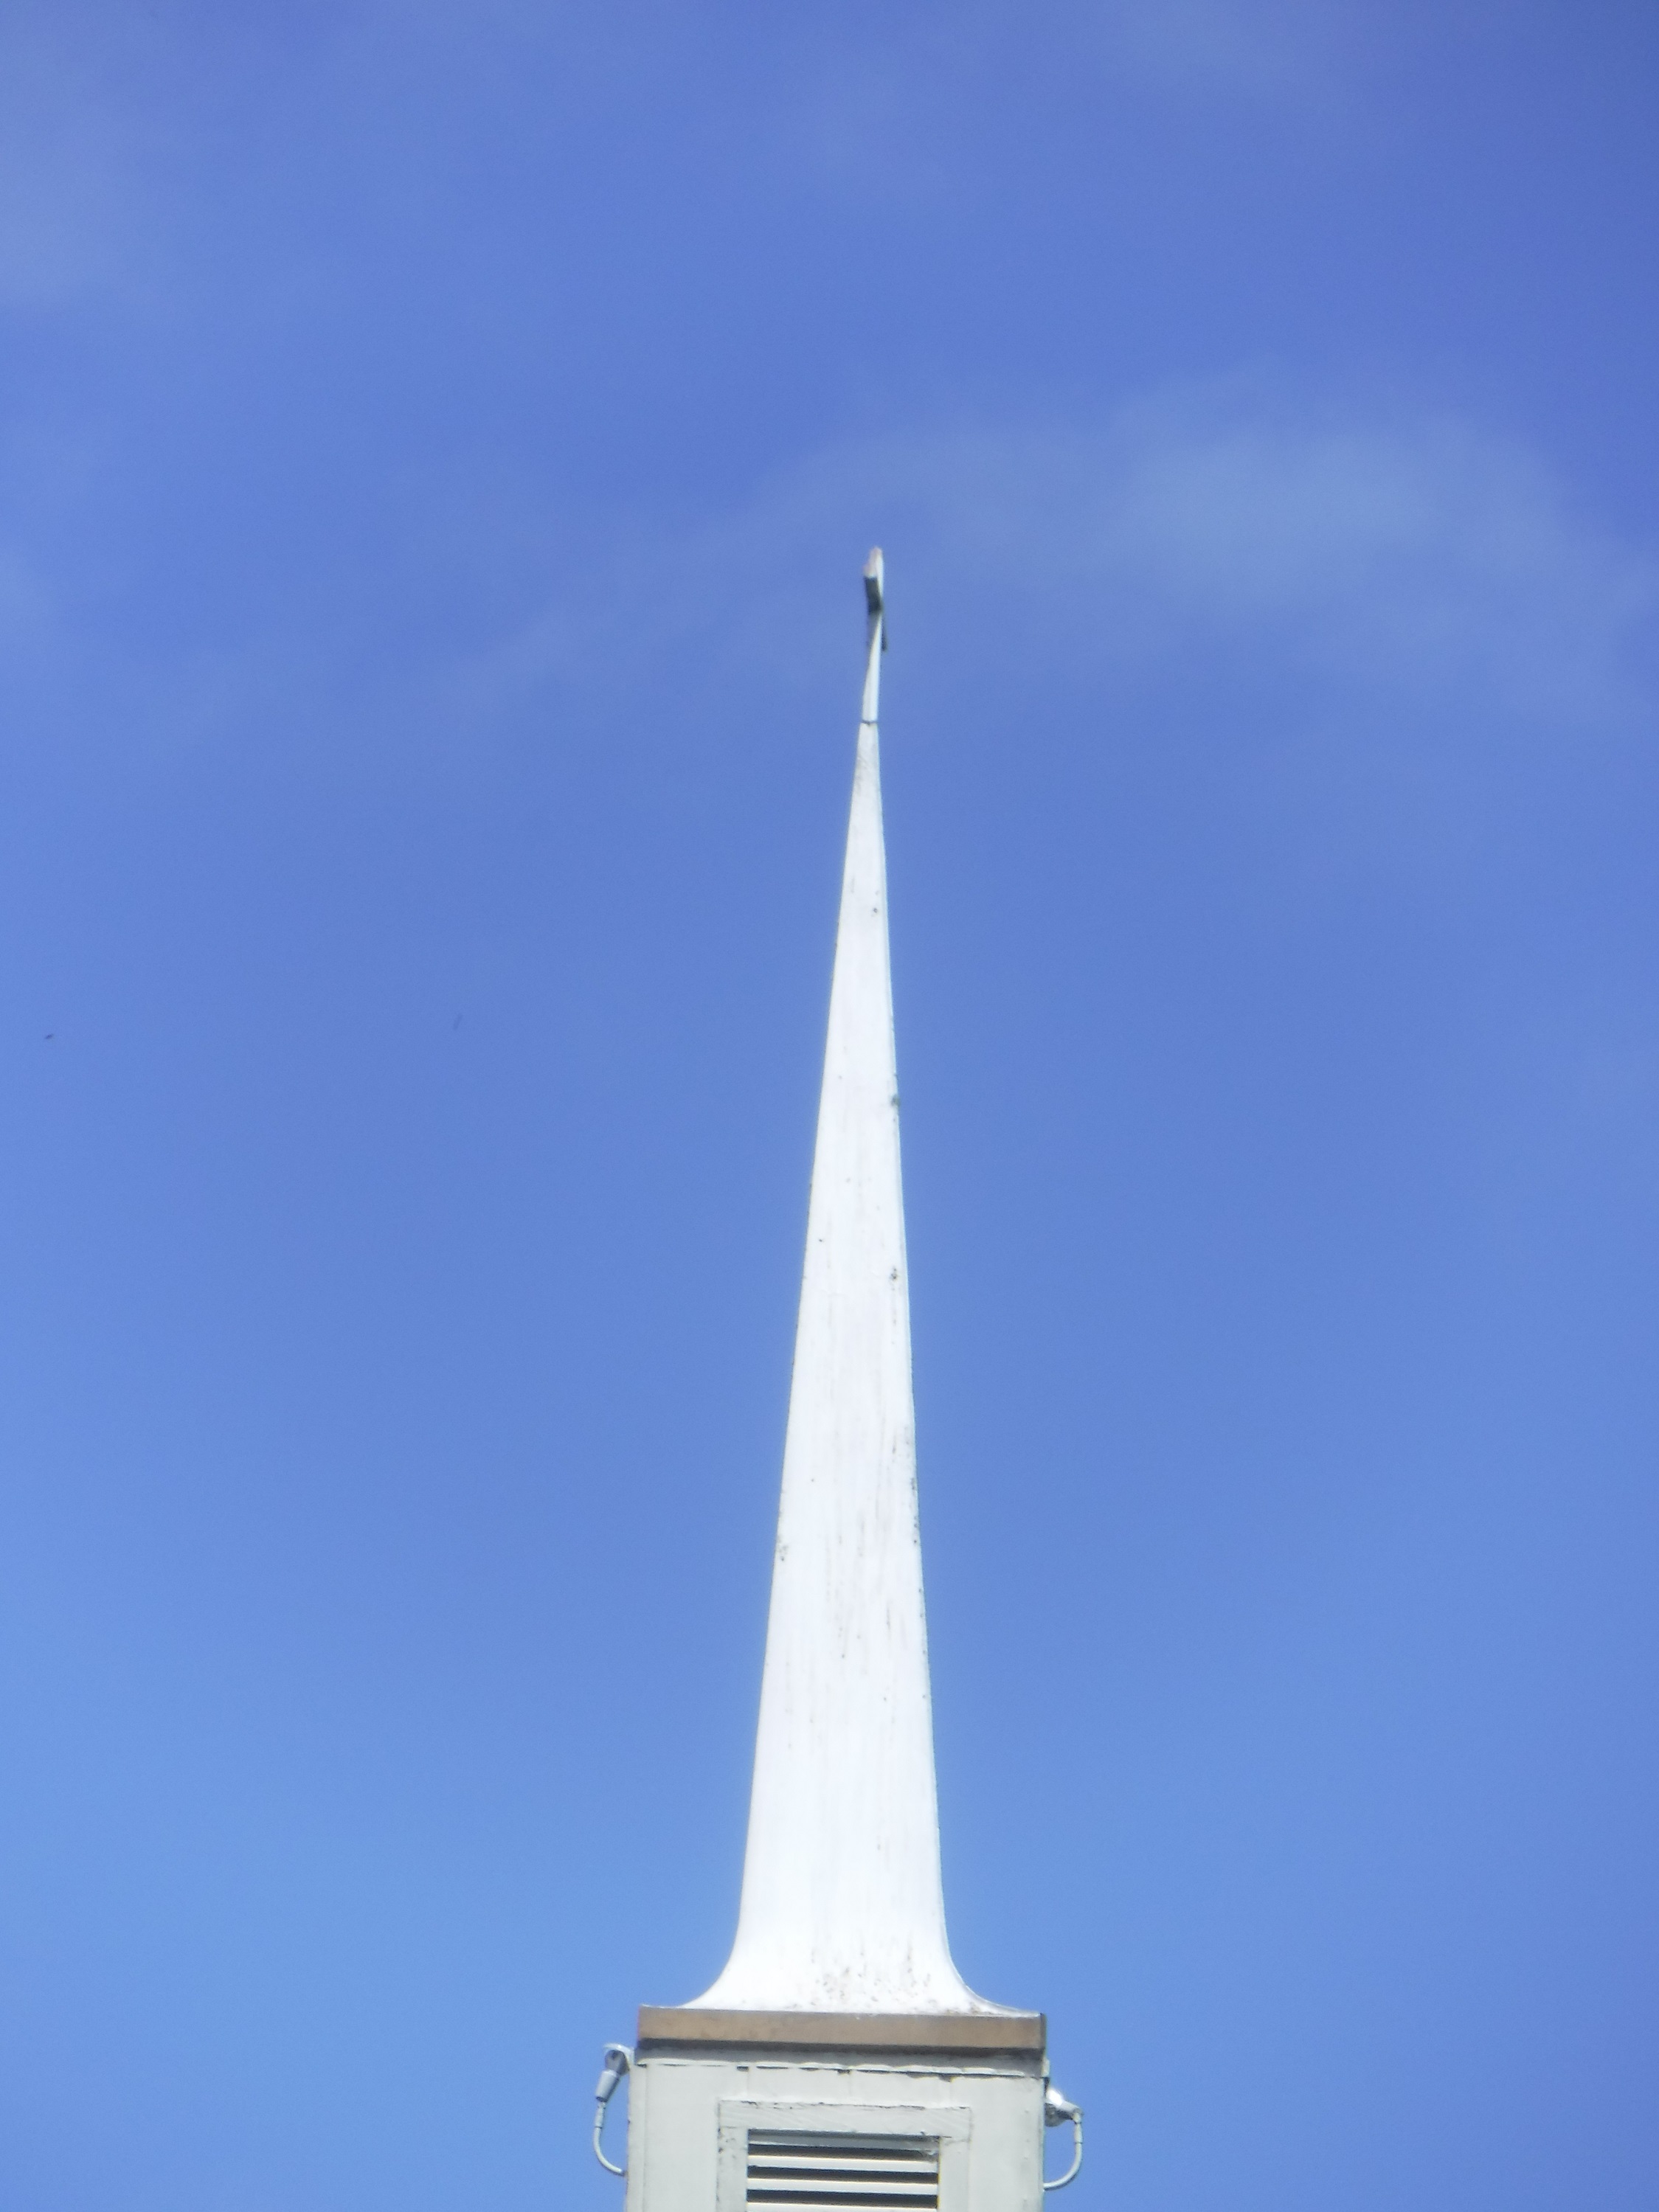 Photo I took of the steeple 7-19-20